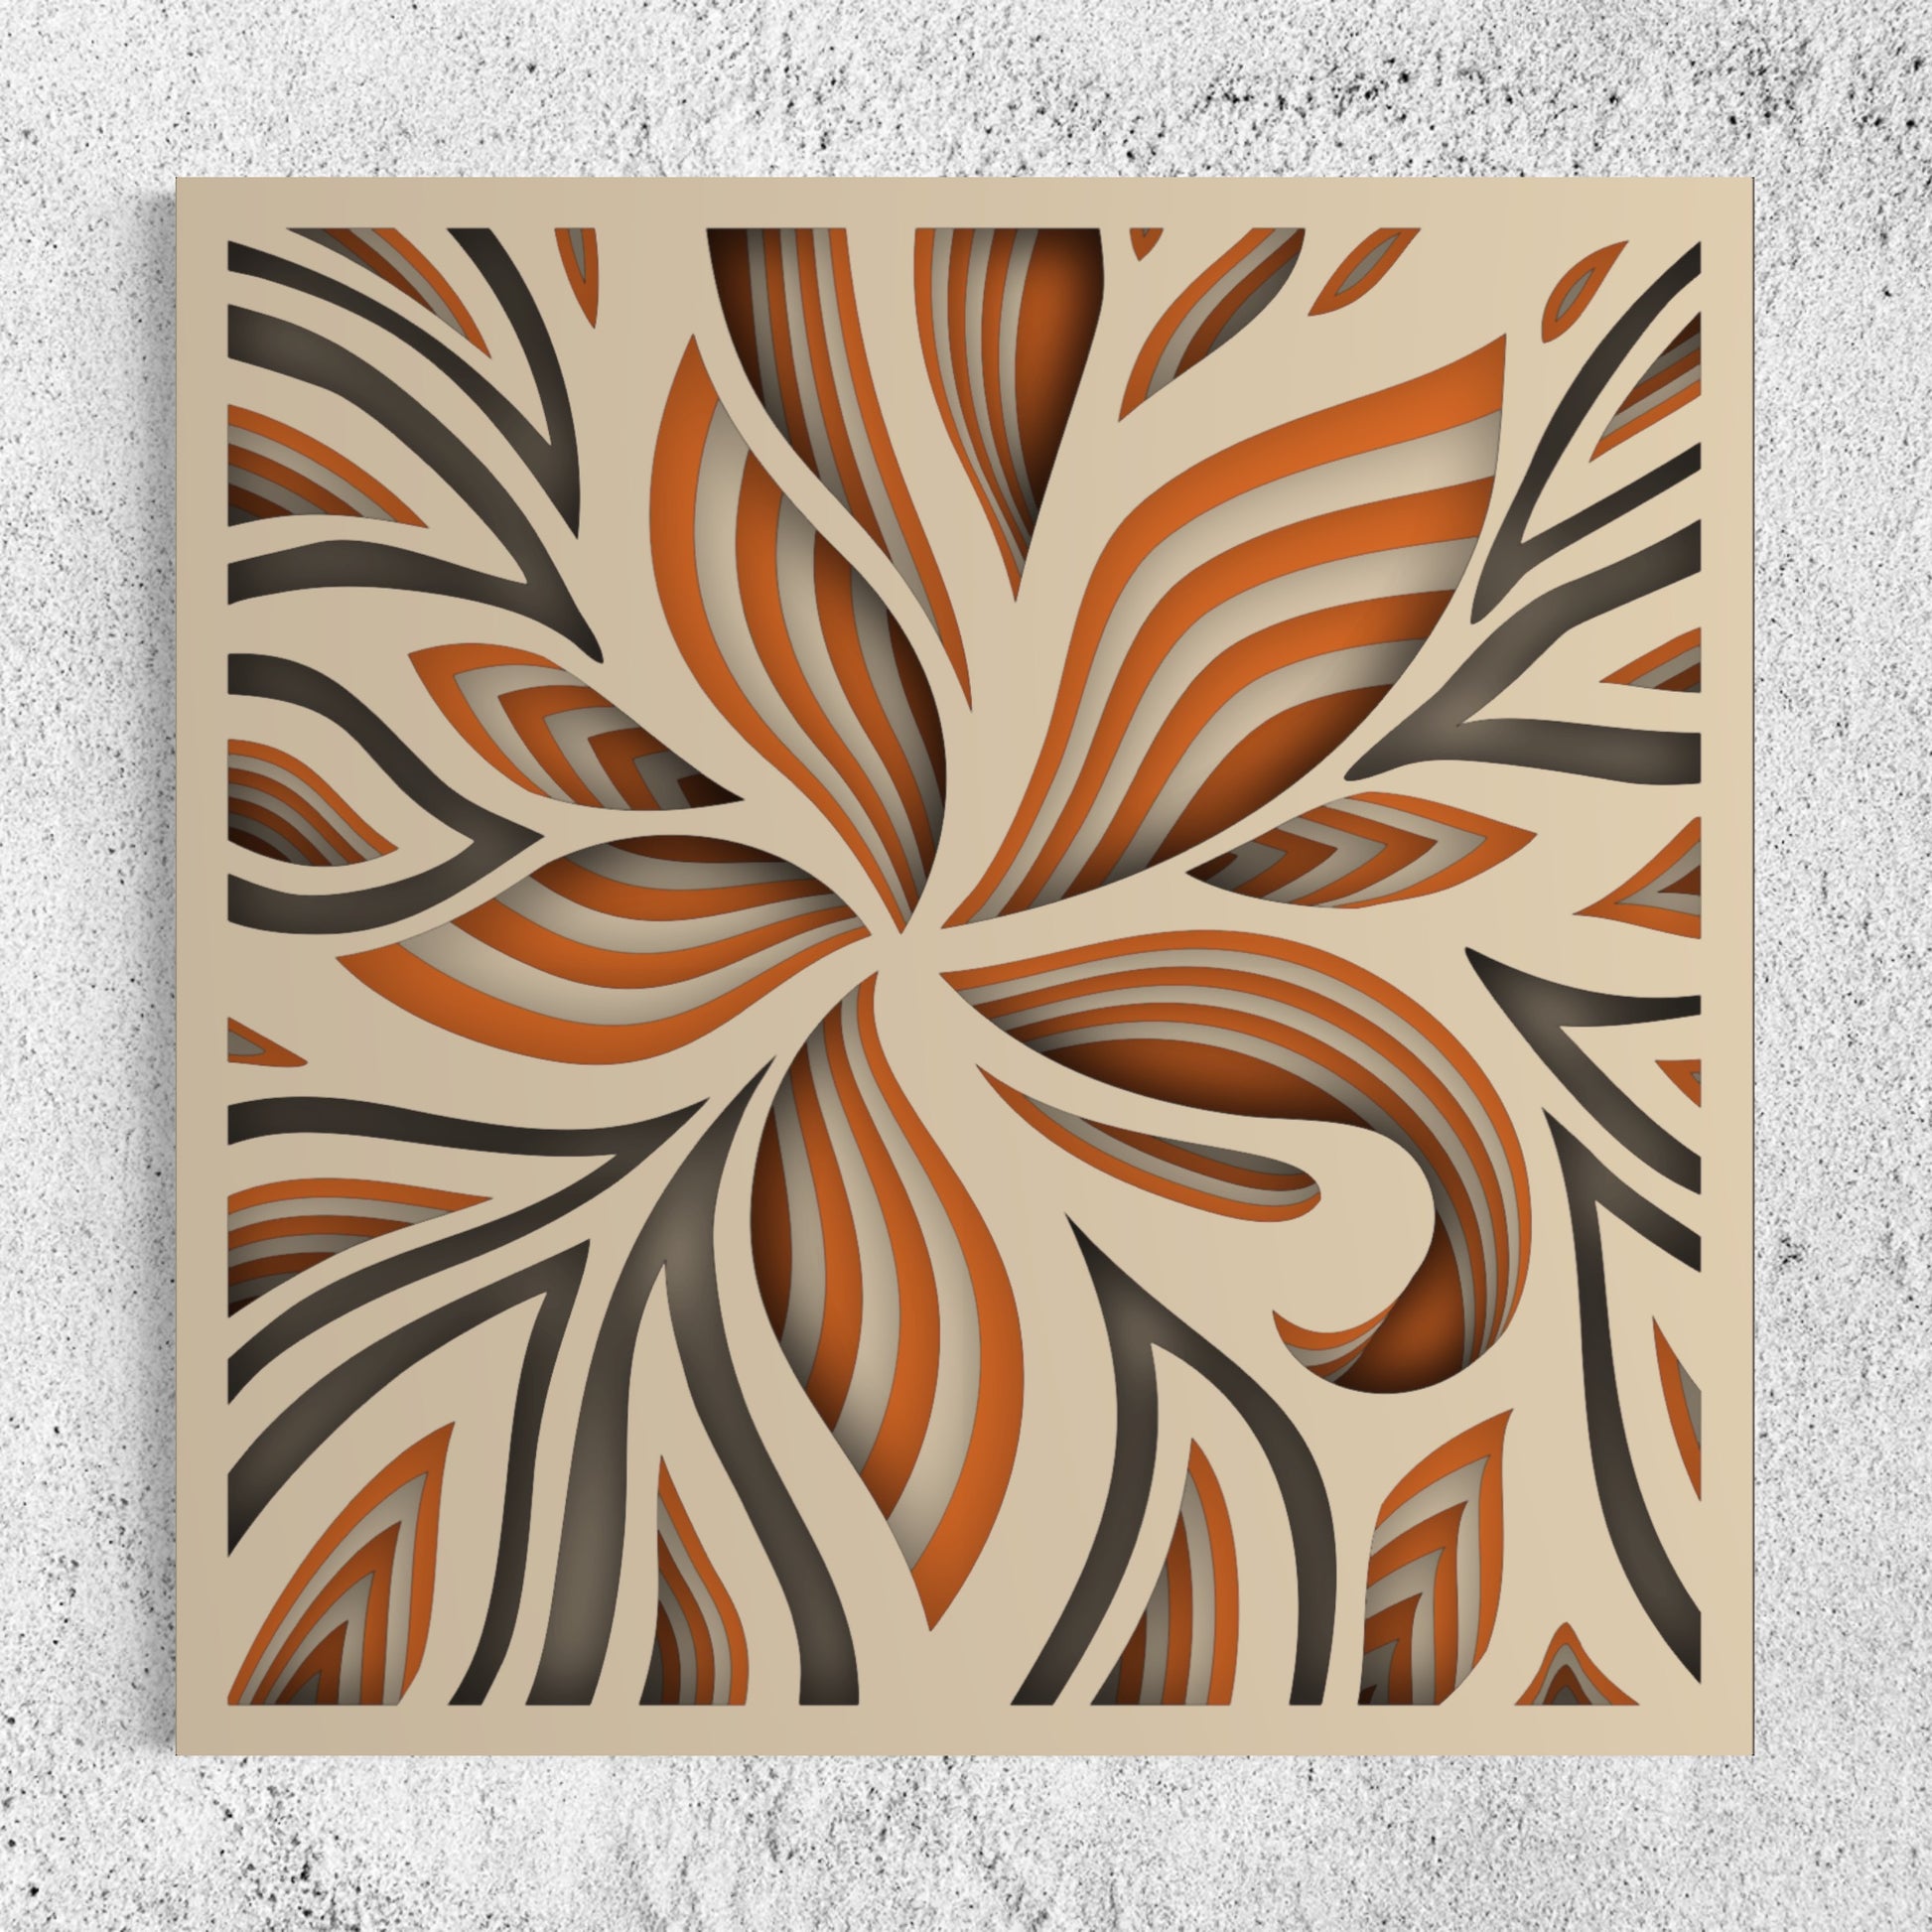 Lily Wooden Wall Art | 15 x 15 Inch | Color Brownish Orange And Pearl Bush